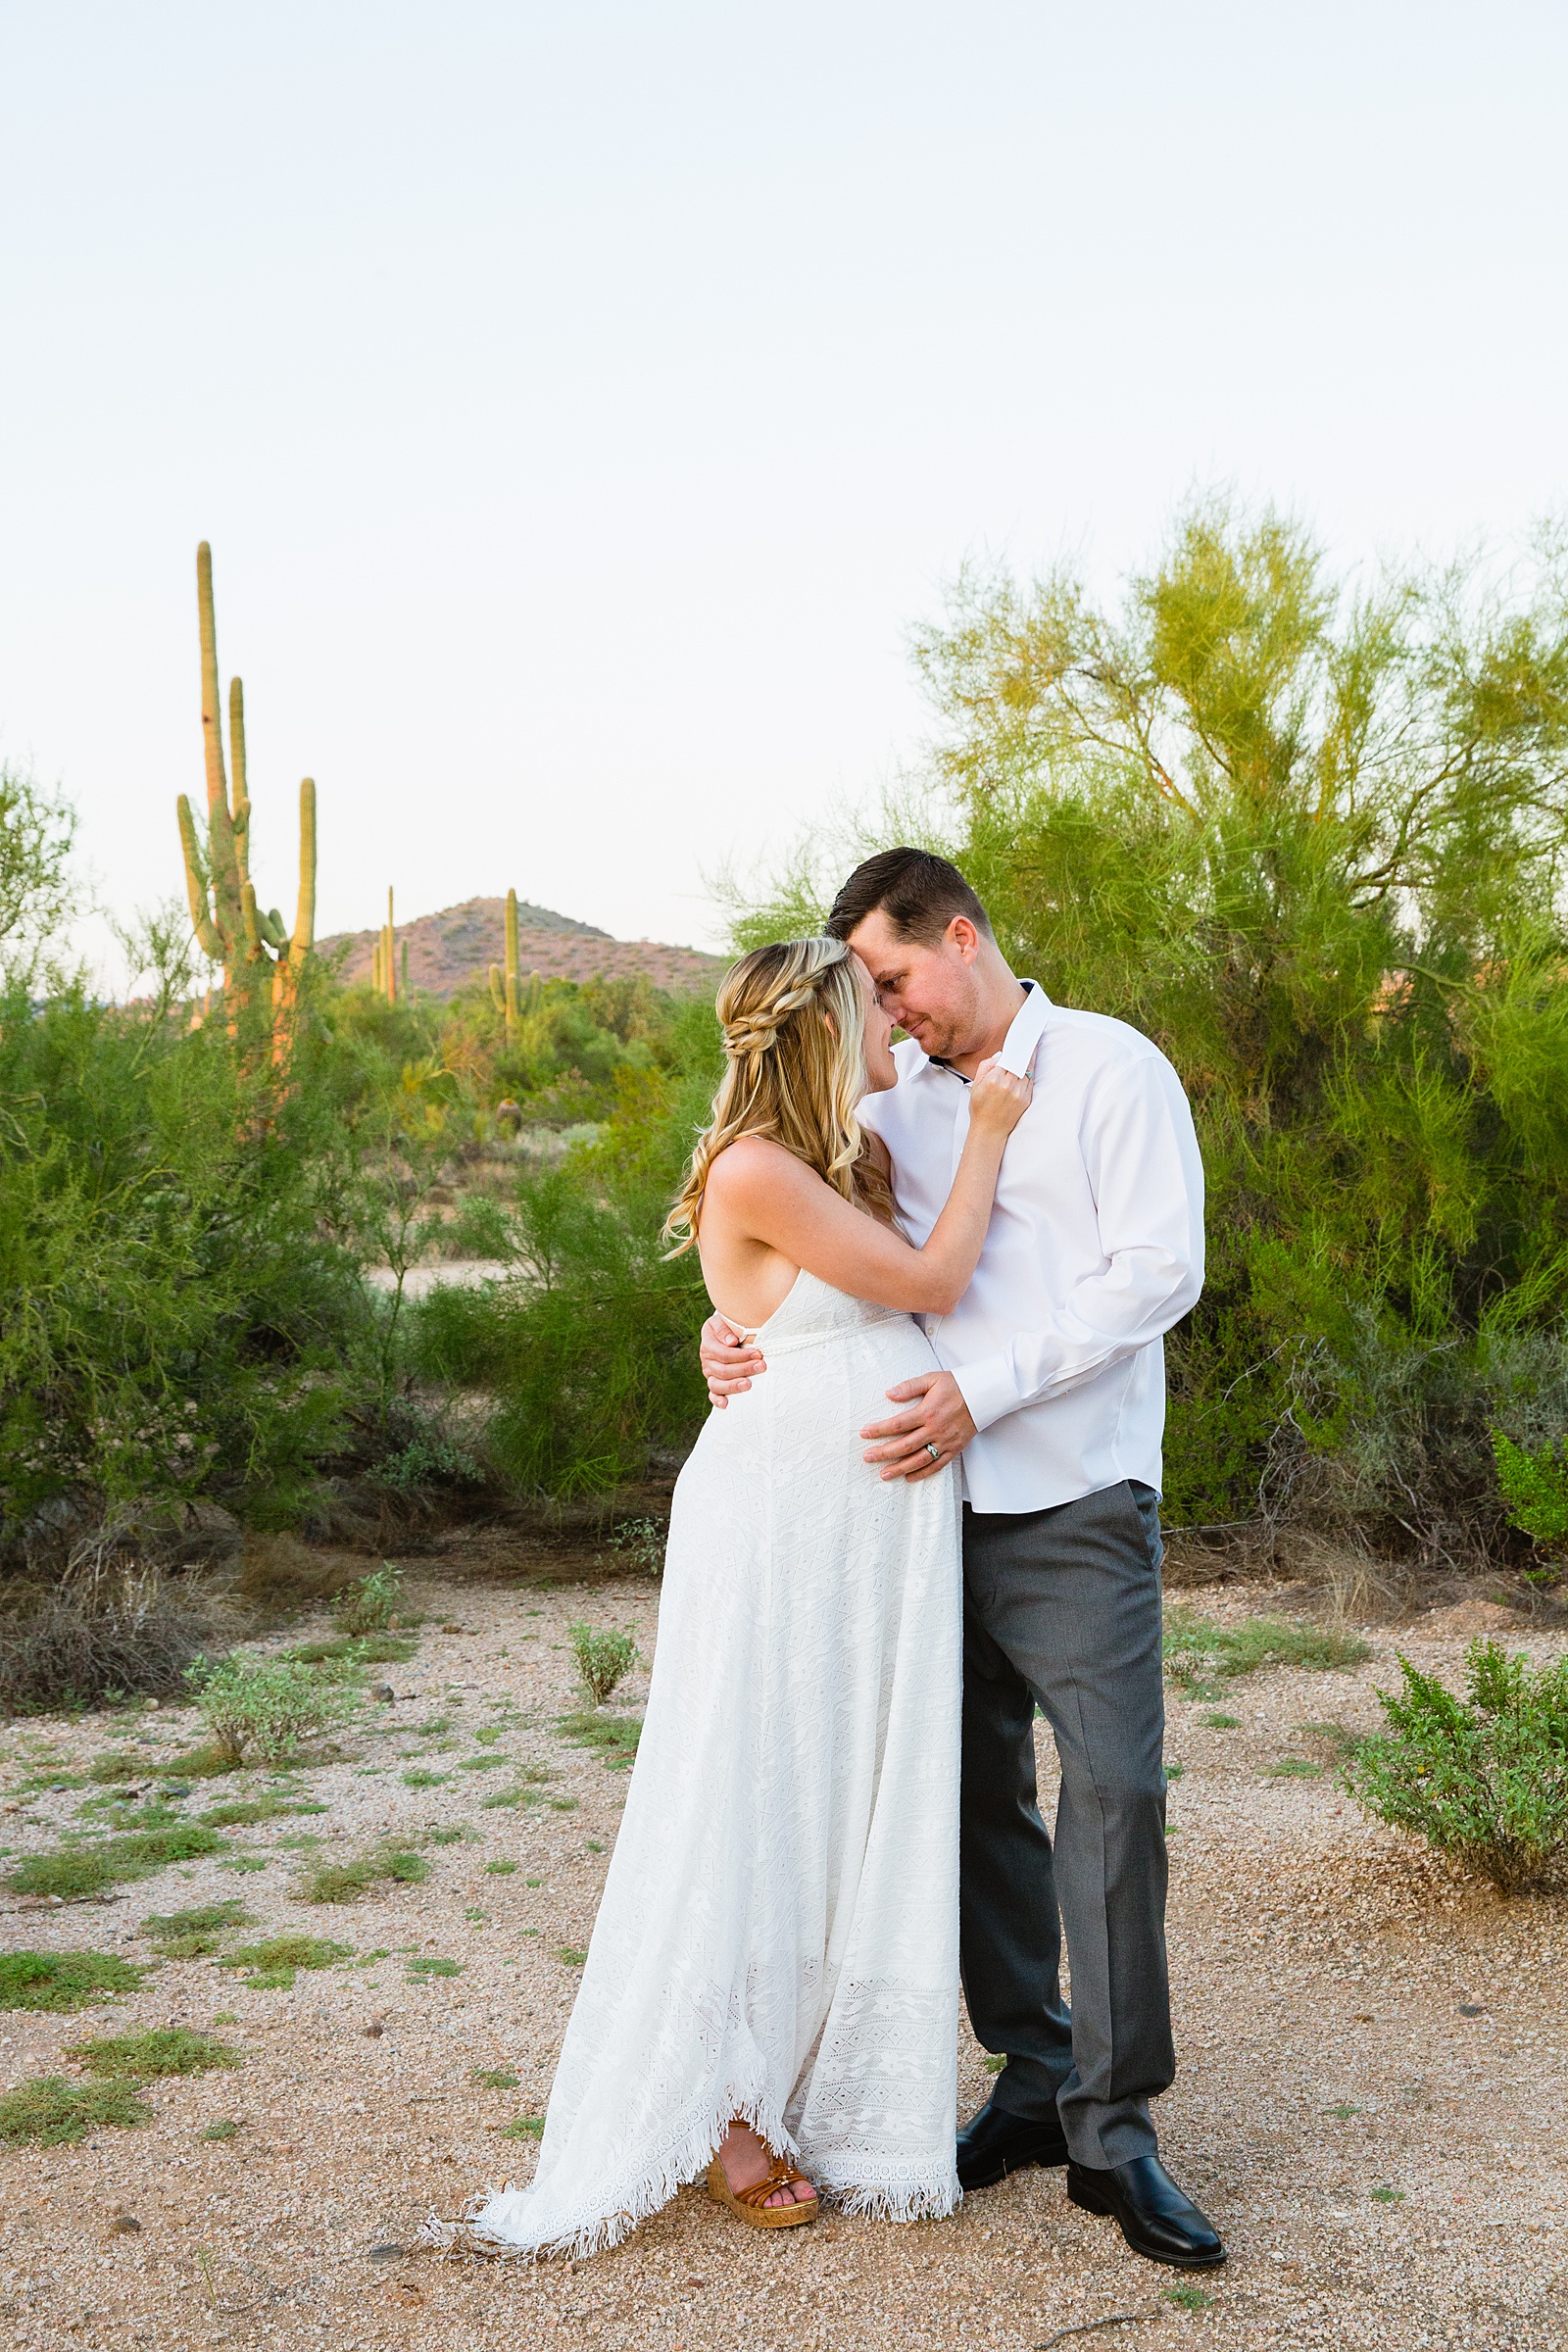 Pregnant bride and Groom share an intimate moment during their desert backyard elopement in Scottsdale by Arizona wedding photographer PMA Photography.